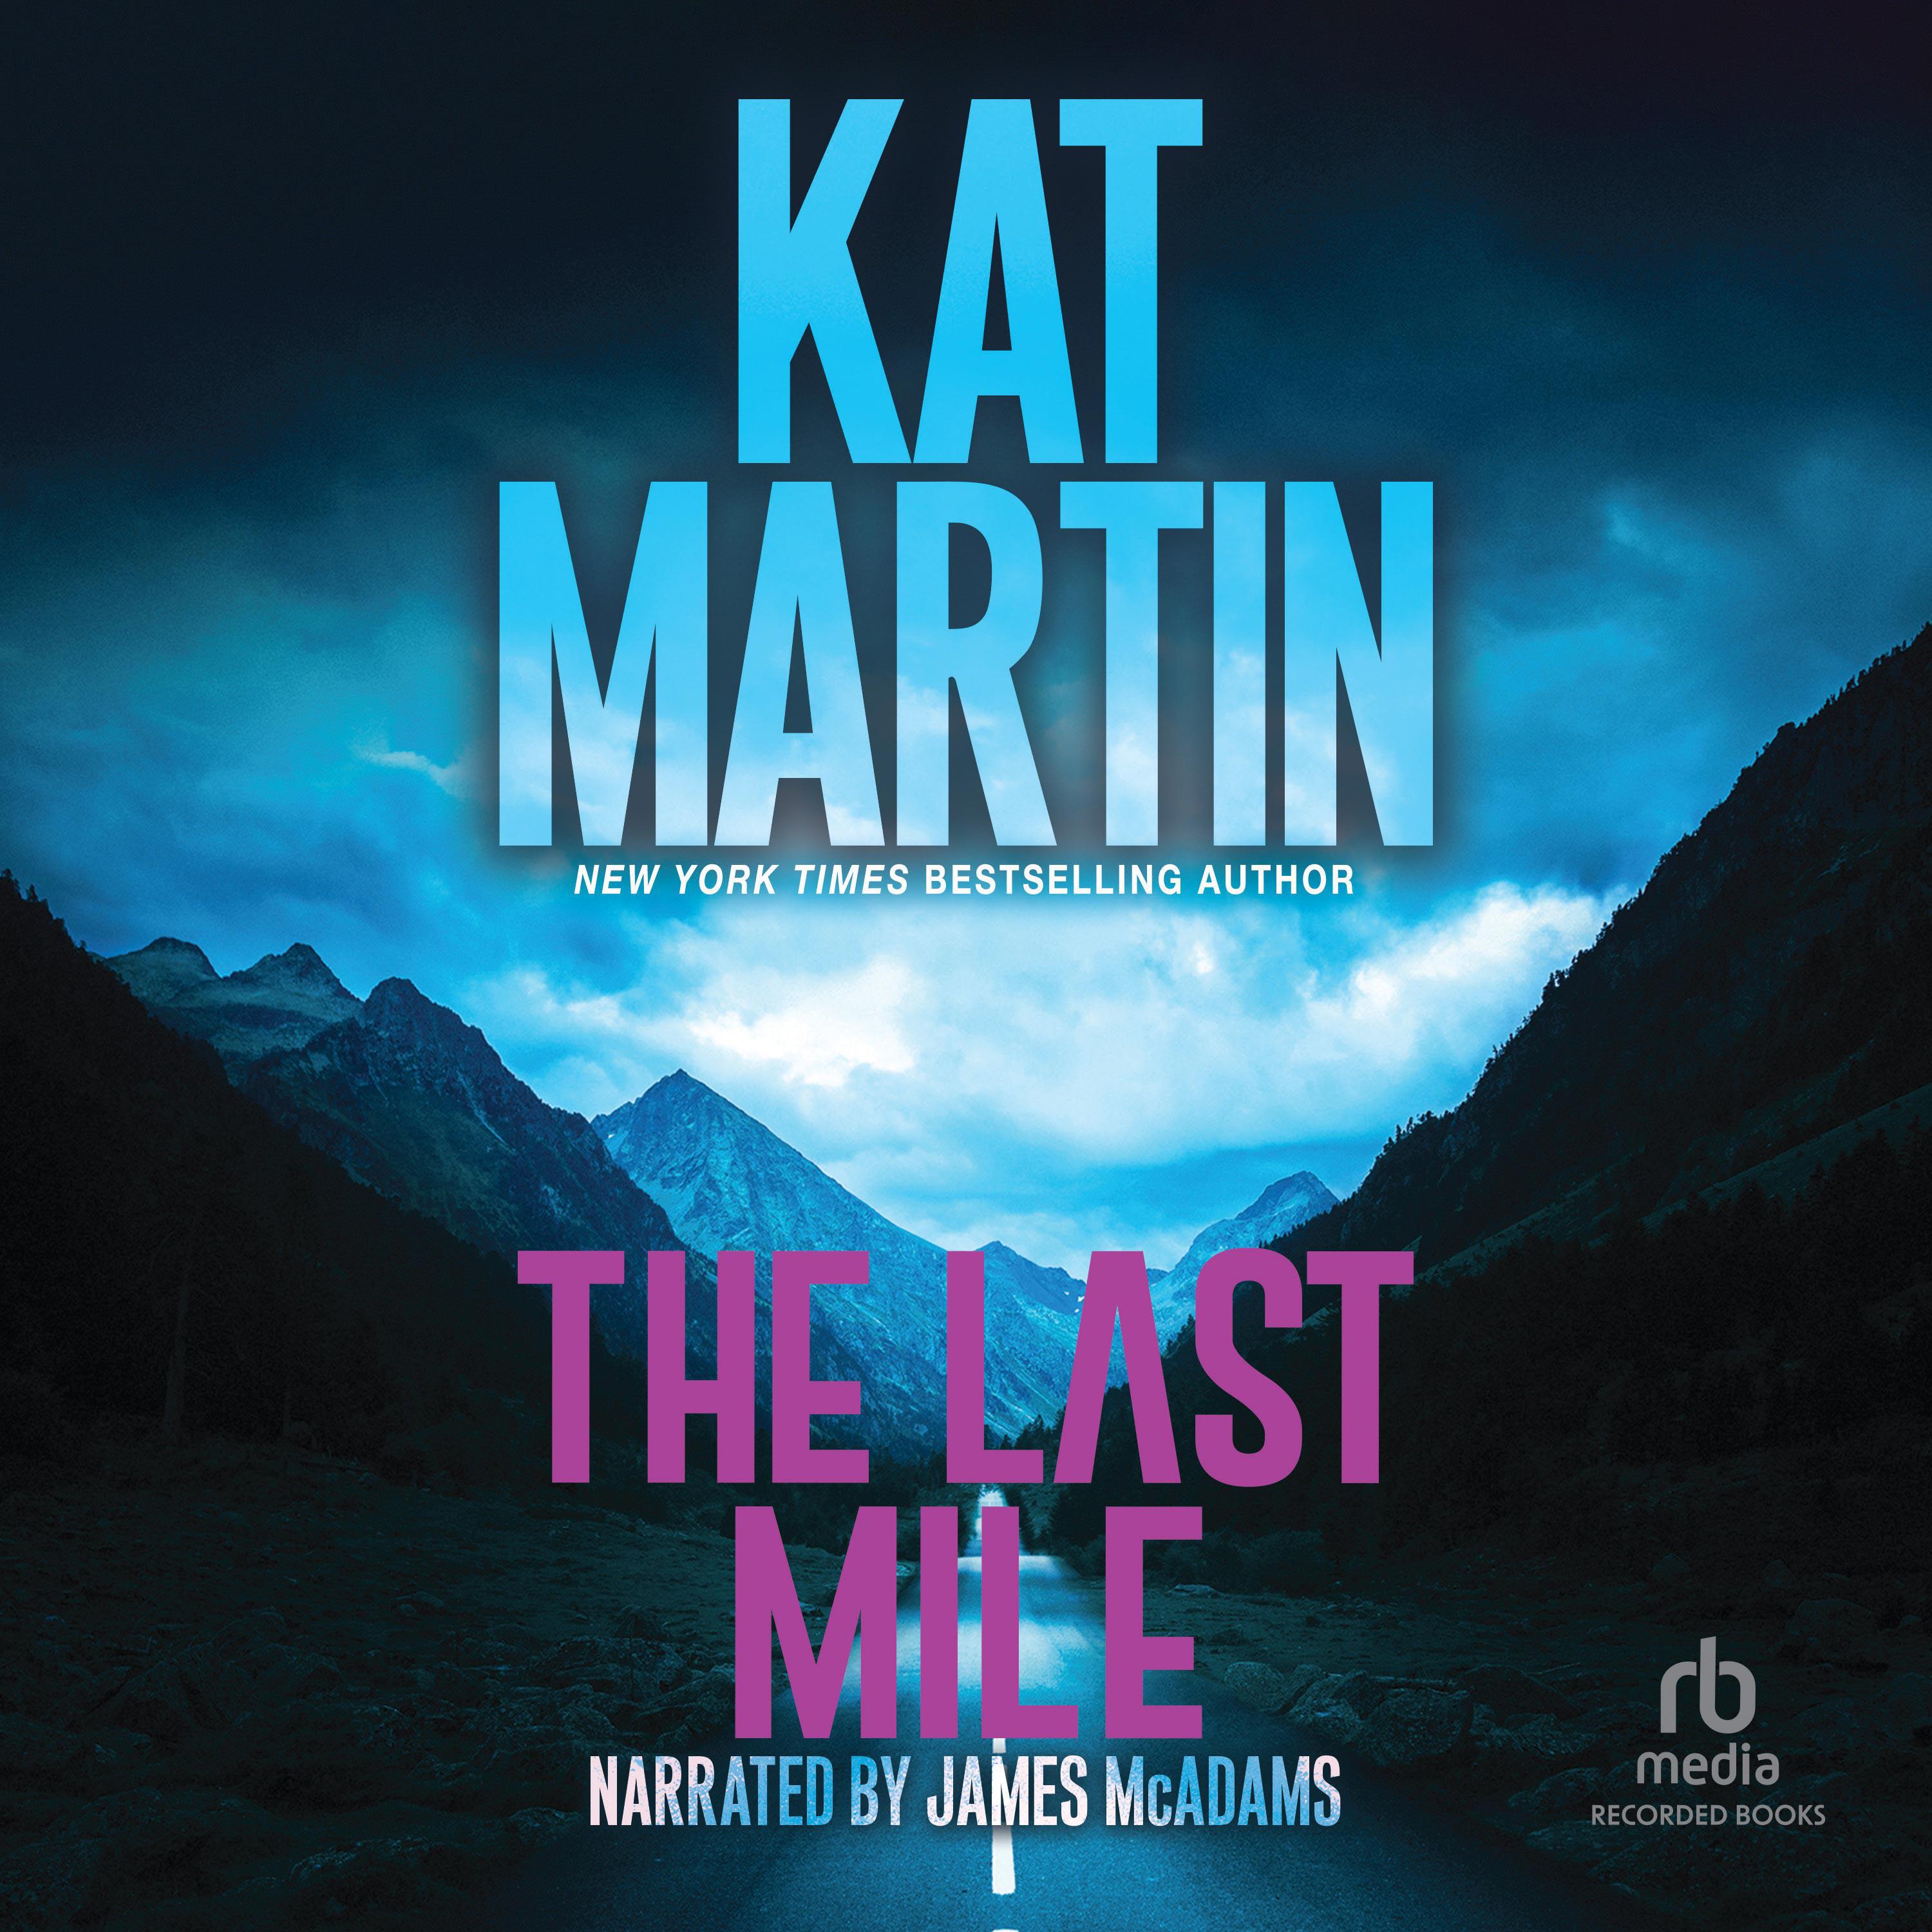 The Last Mile Audiobook by Kat Martin — Listen Now